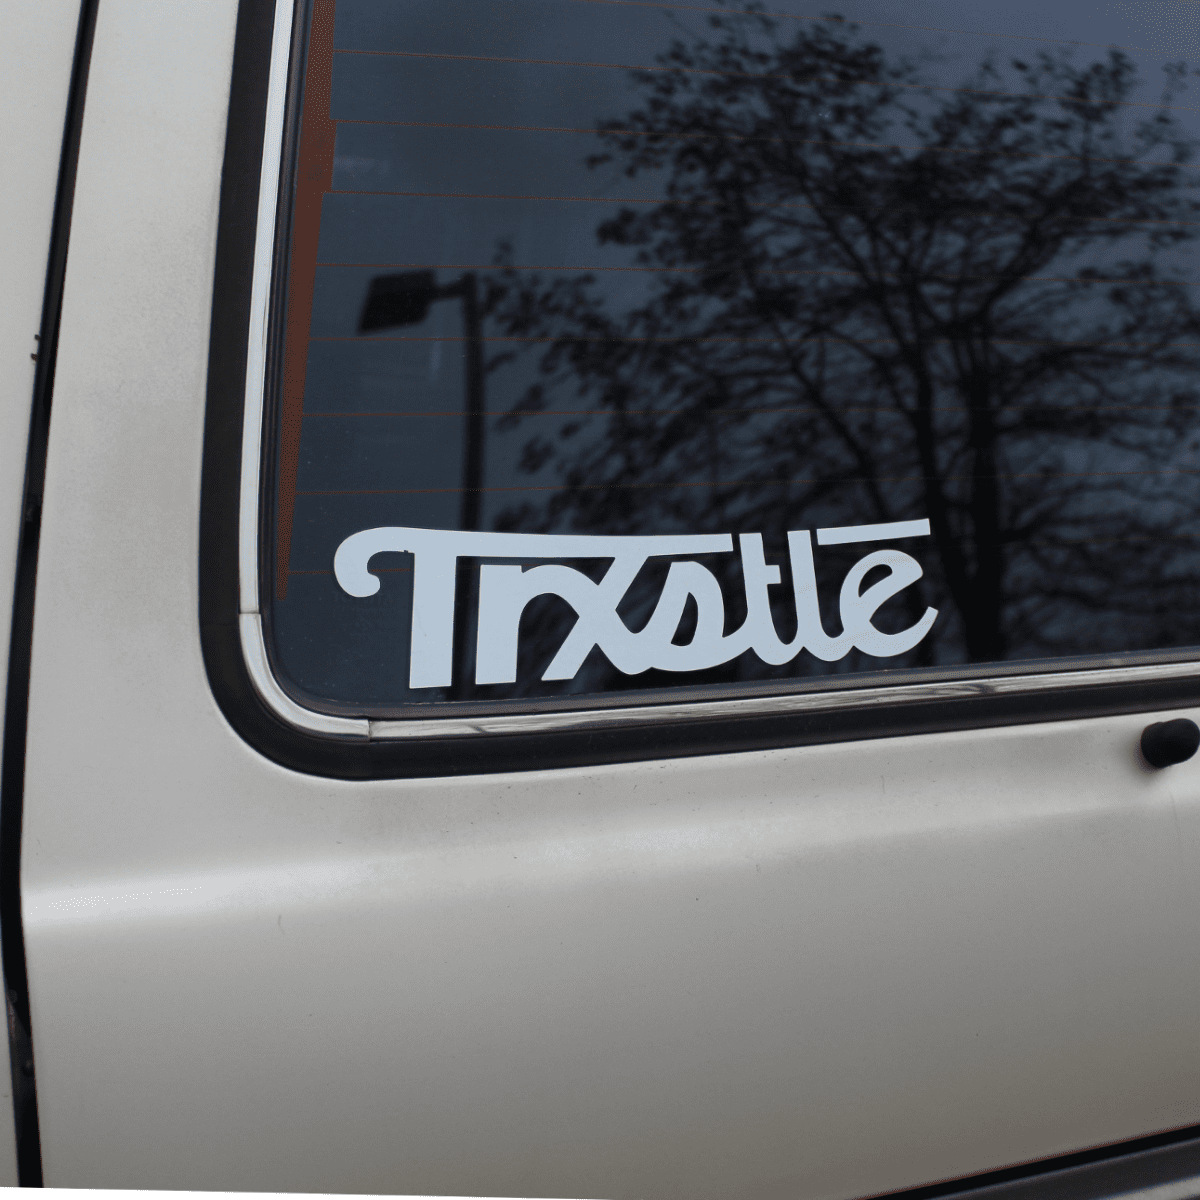 Trxstle Large Transfer Decal